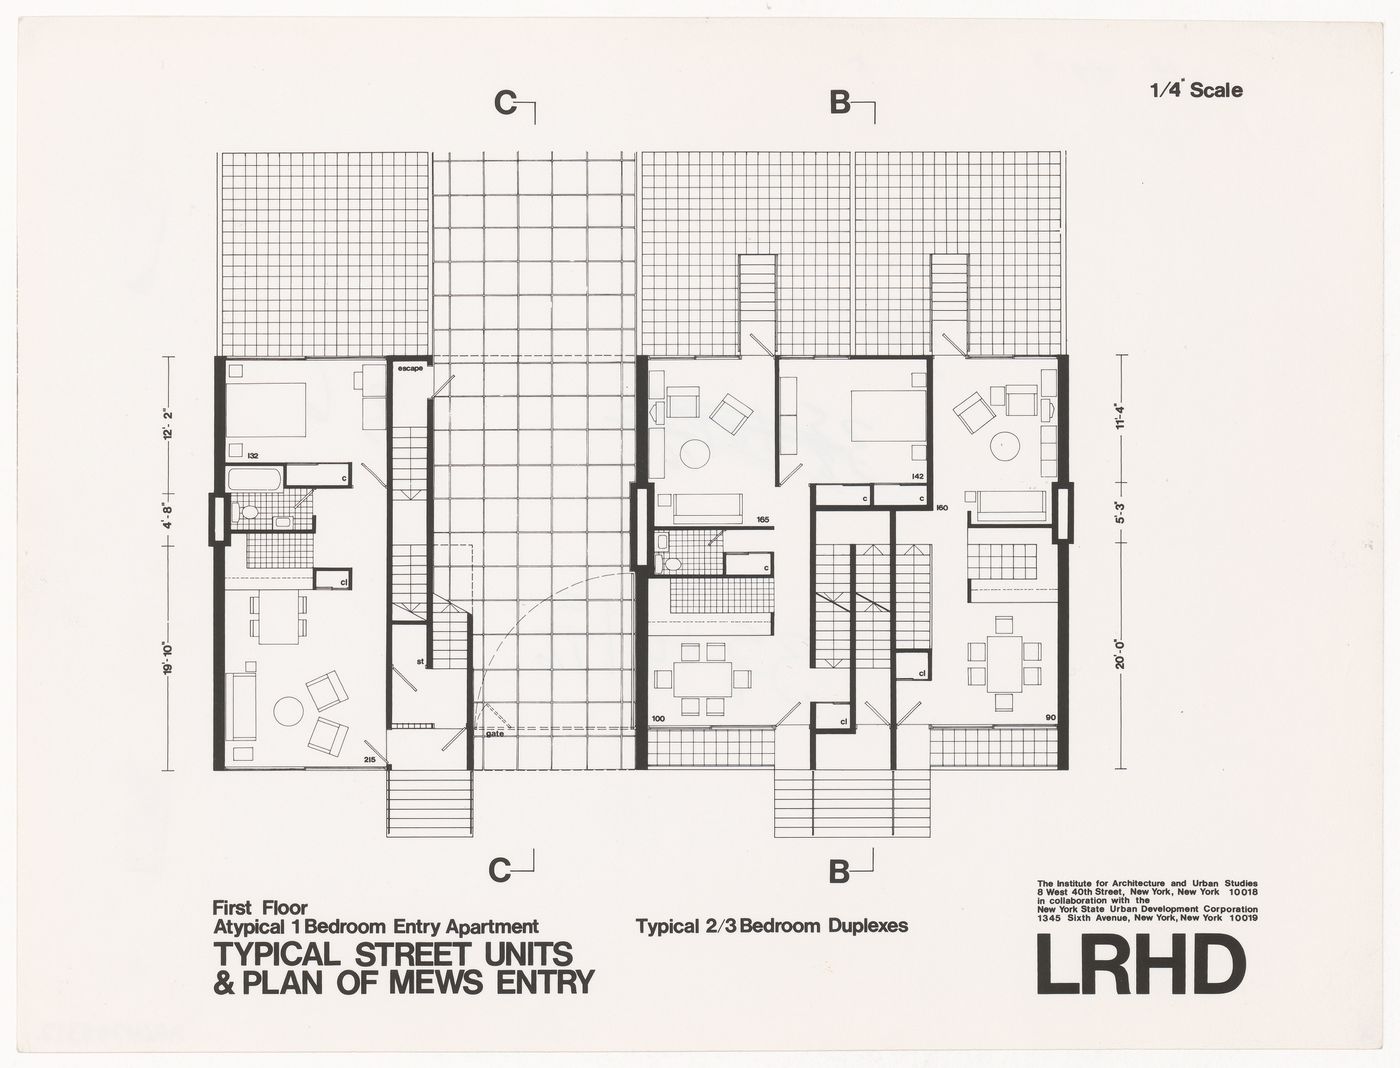 Typical street units and plan of mews entry for the Low-Rise High-Density MoMA exhibition